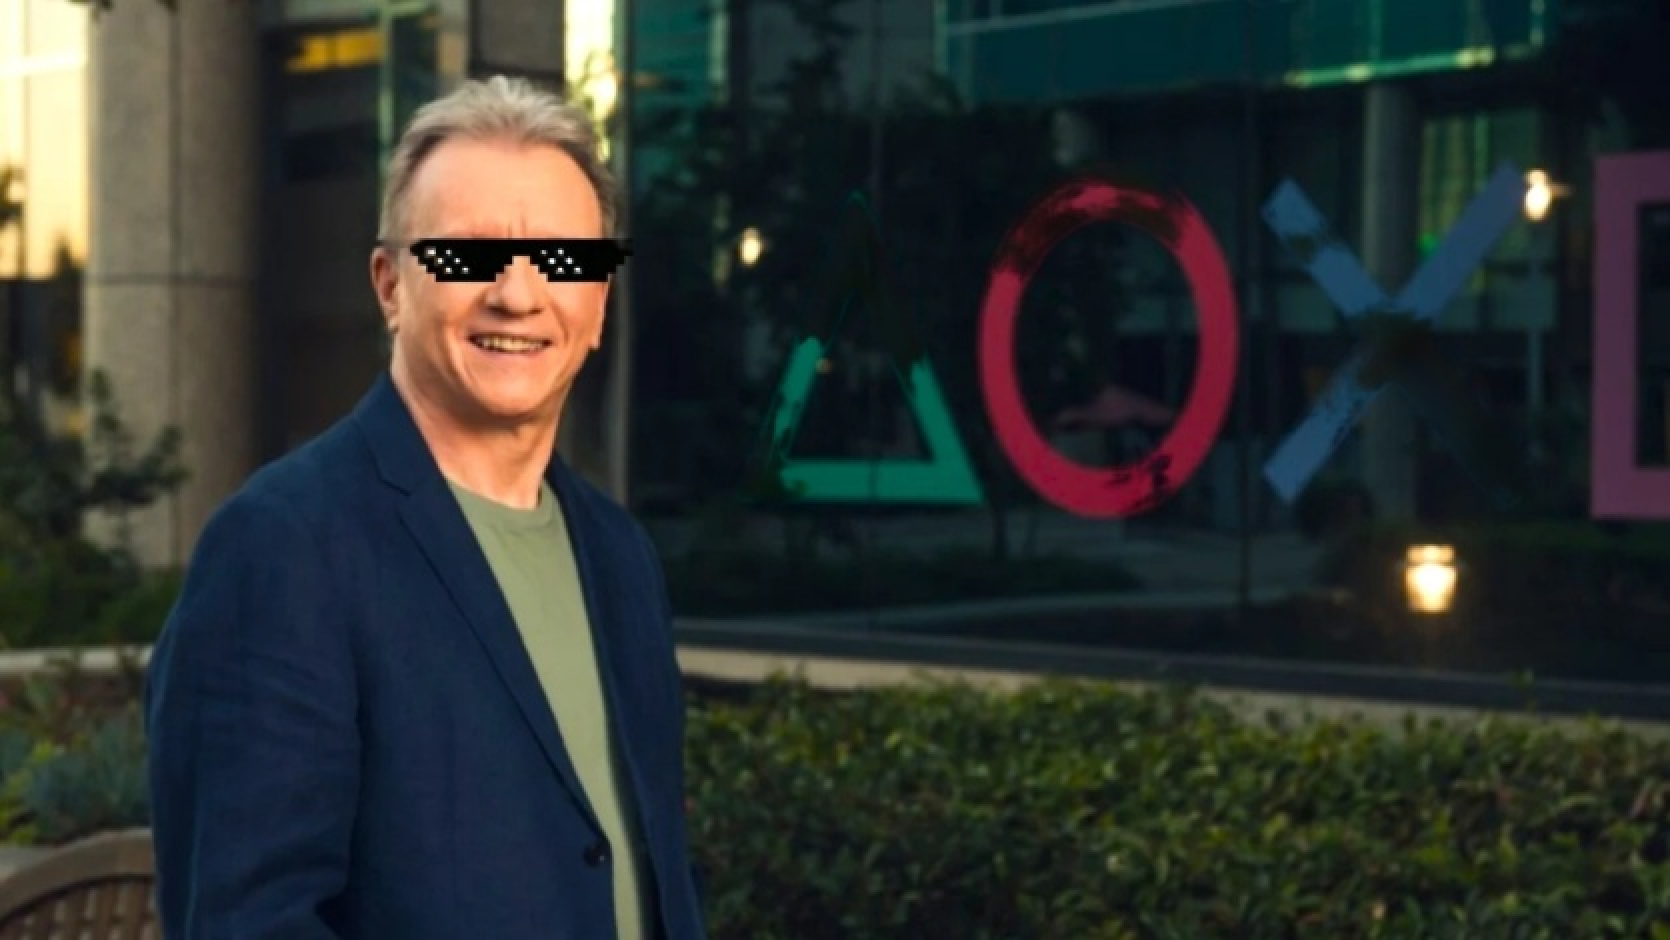 End of an era: Jim Ryan has stepped down as PlayStation CEO, he's no longer at Sony